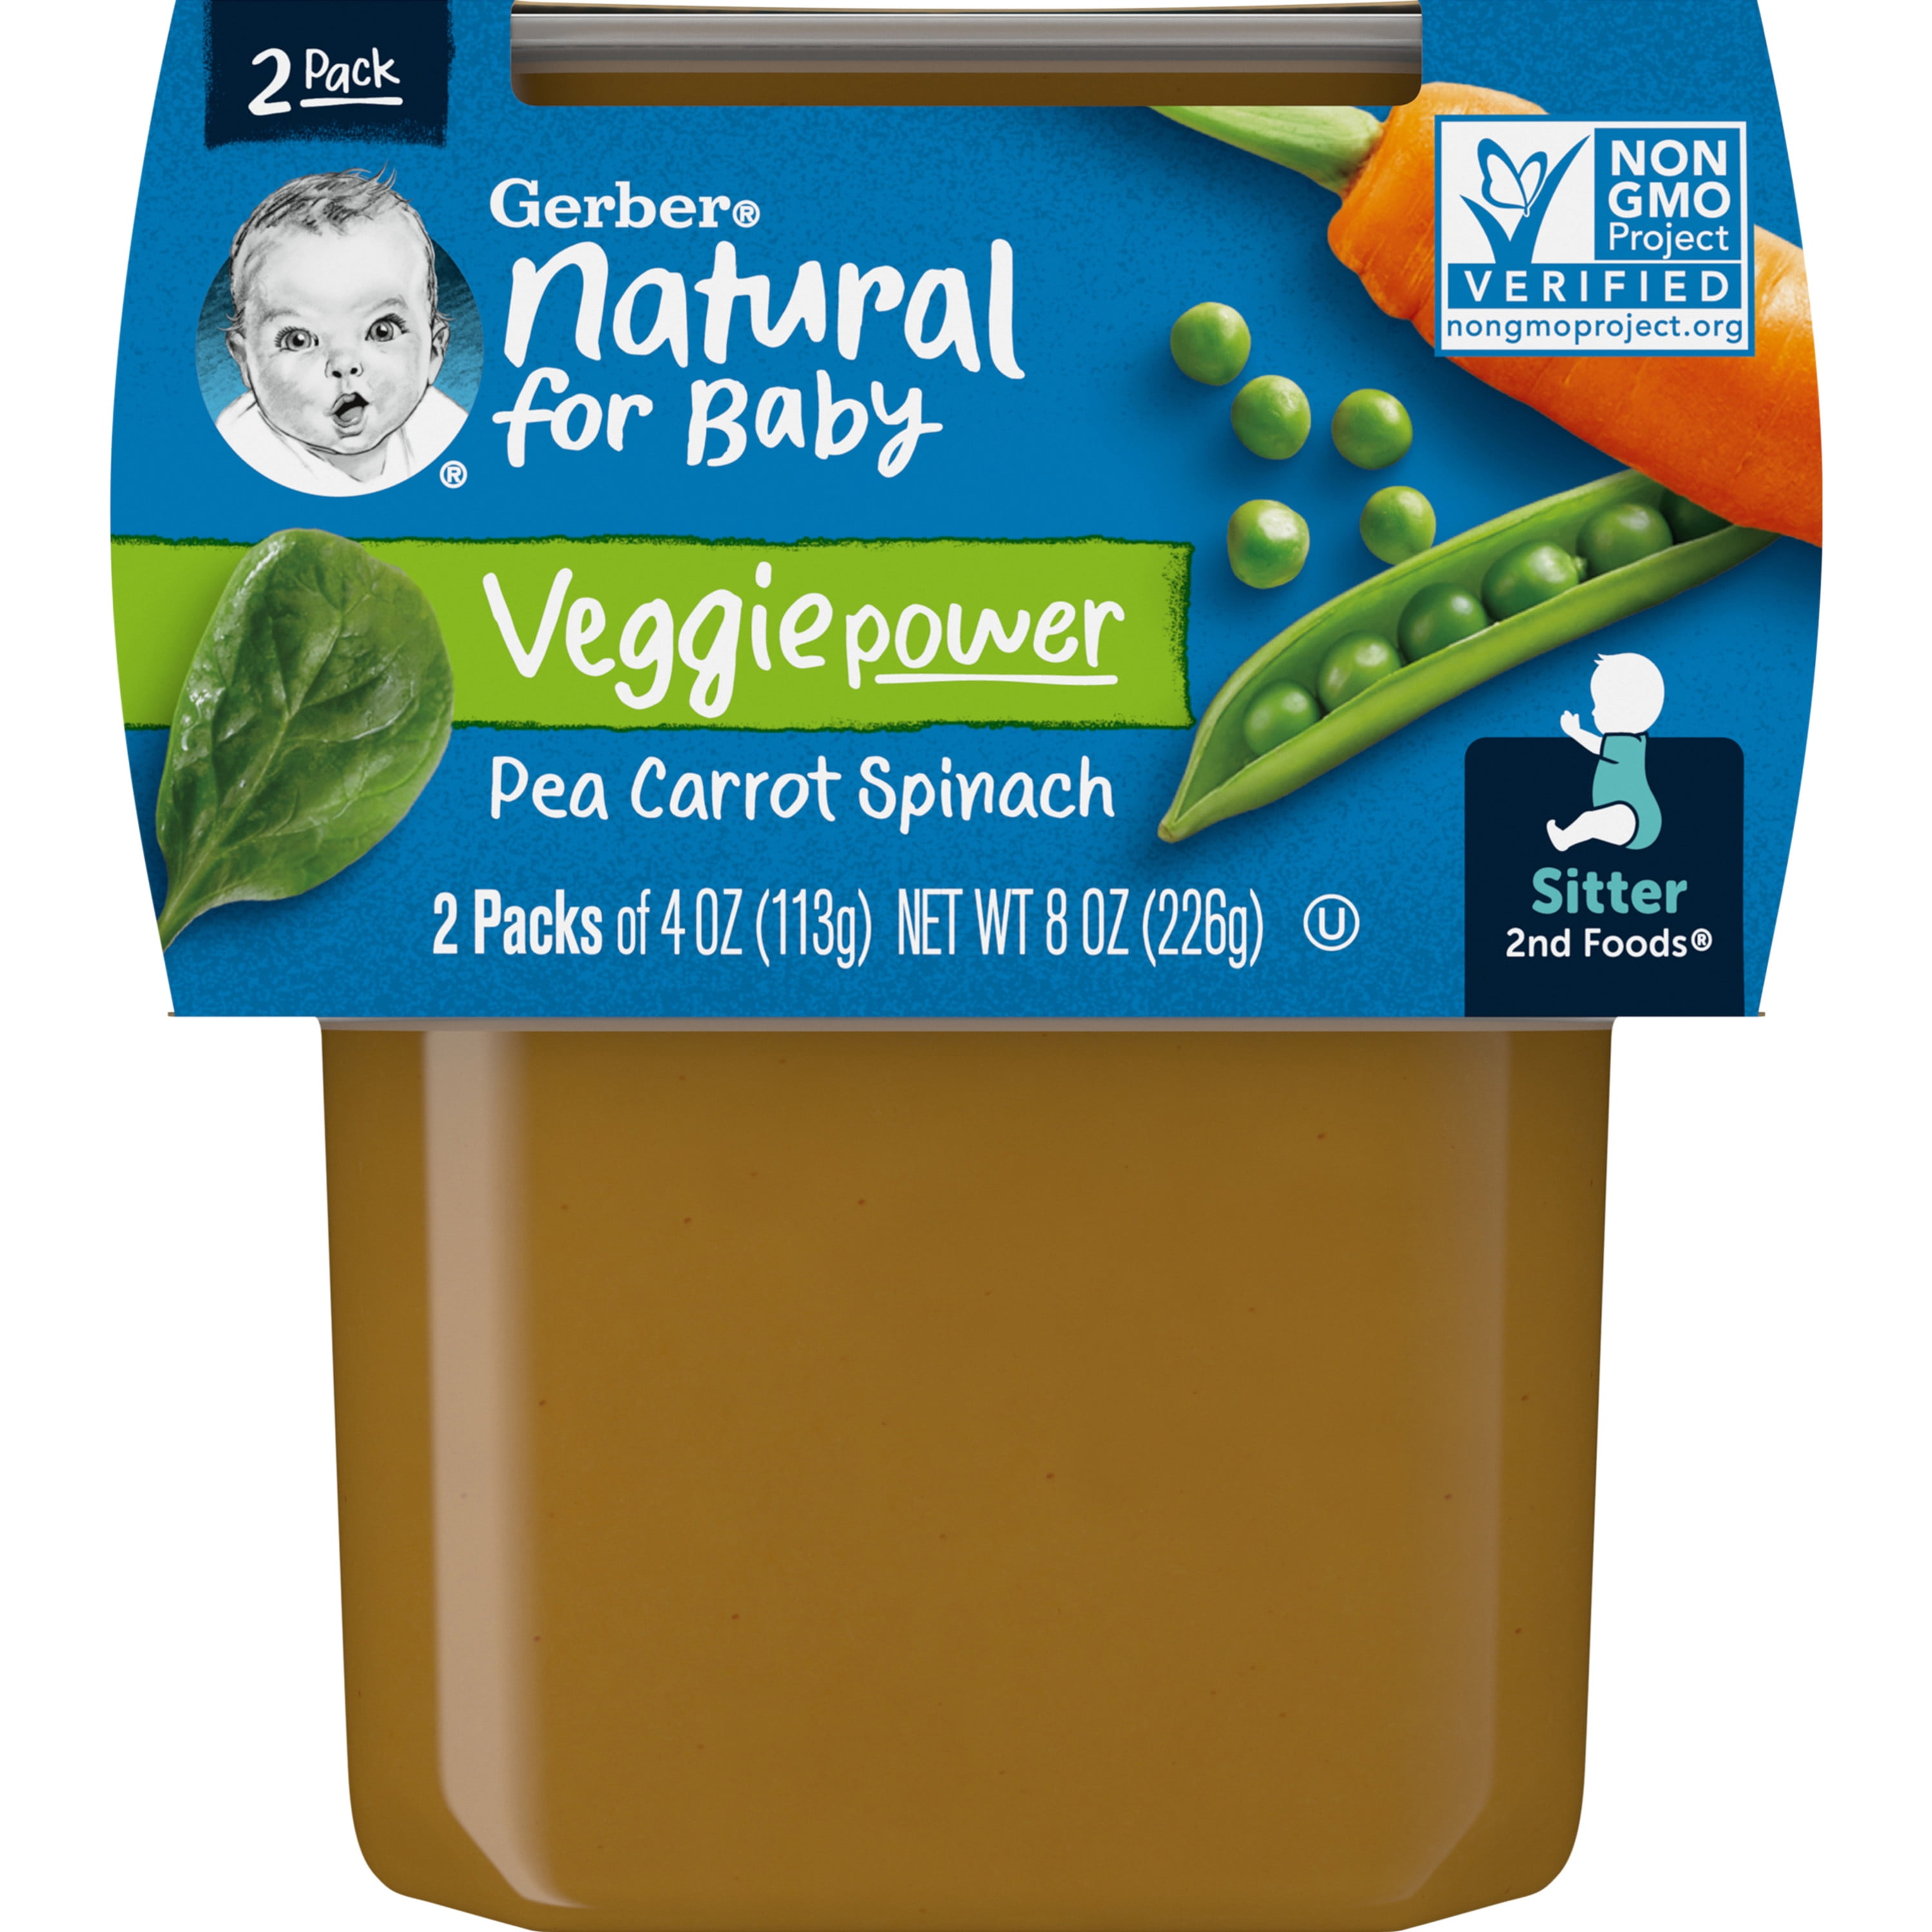 Gerber 2nd Foods Natural for Baby Veggie Power Baby Food, Pea Carrot Spinach, 4 oz Tubs (2 Pack)